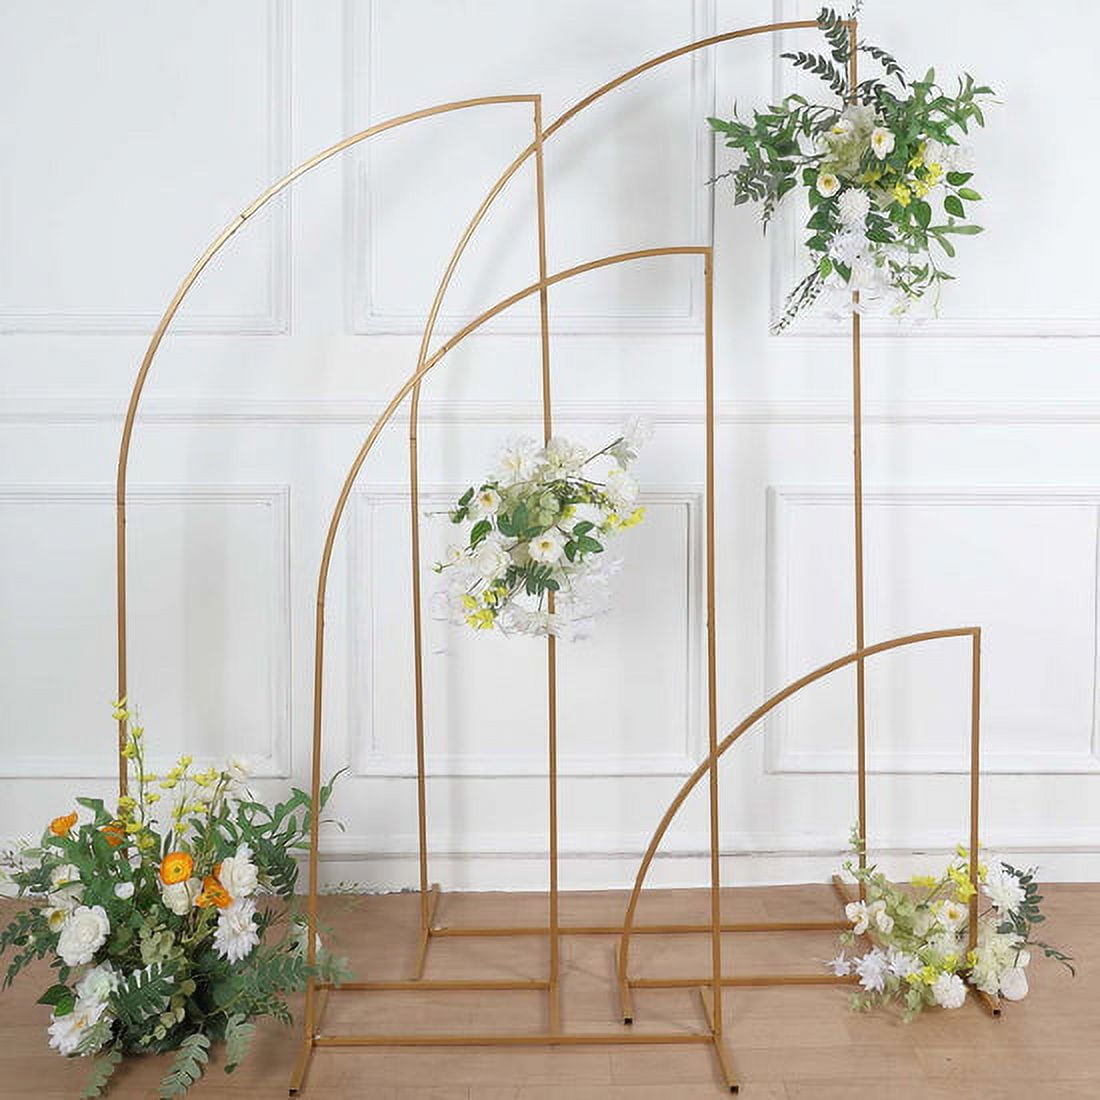 Wocadle Metal Arch Backdrop Stand Set of 2 Gold Curved Top Wedding